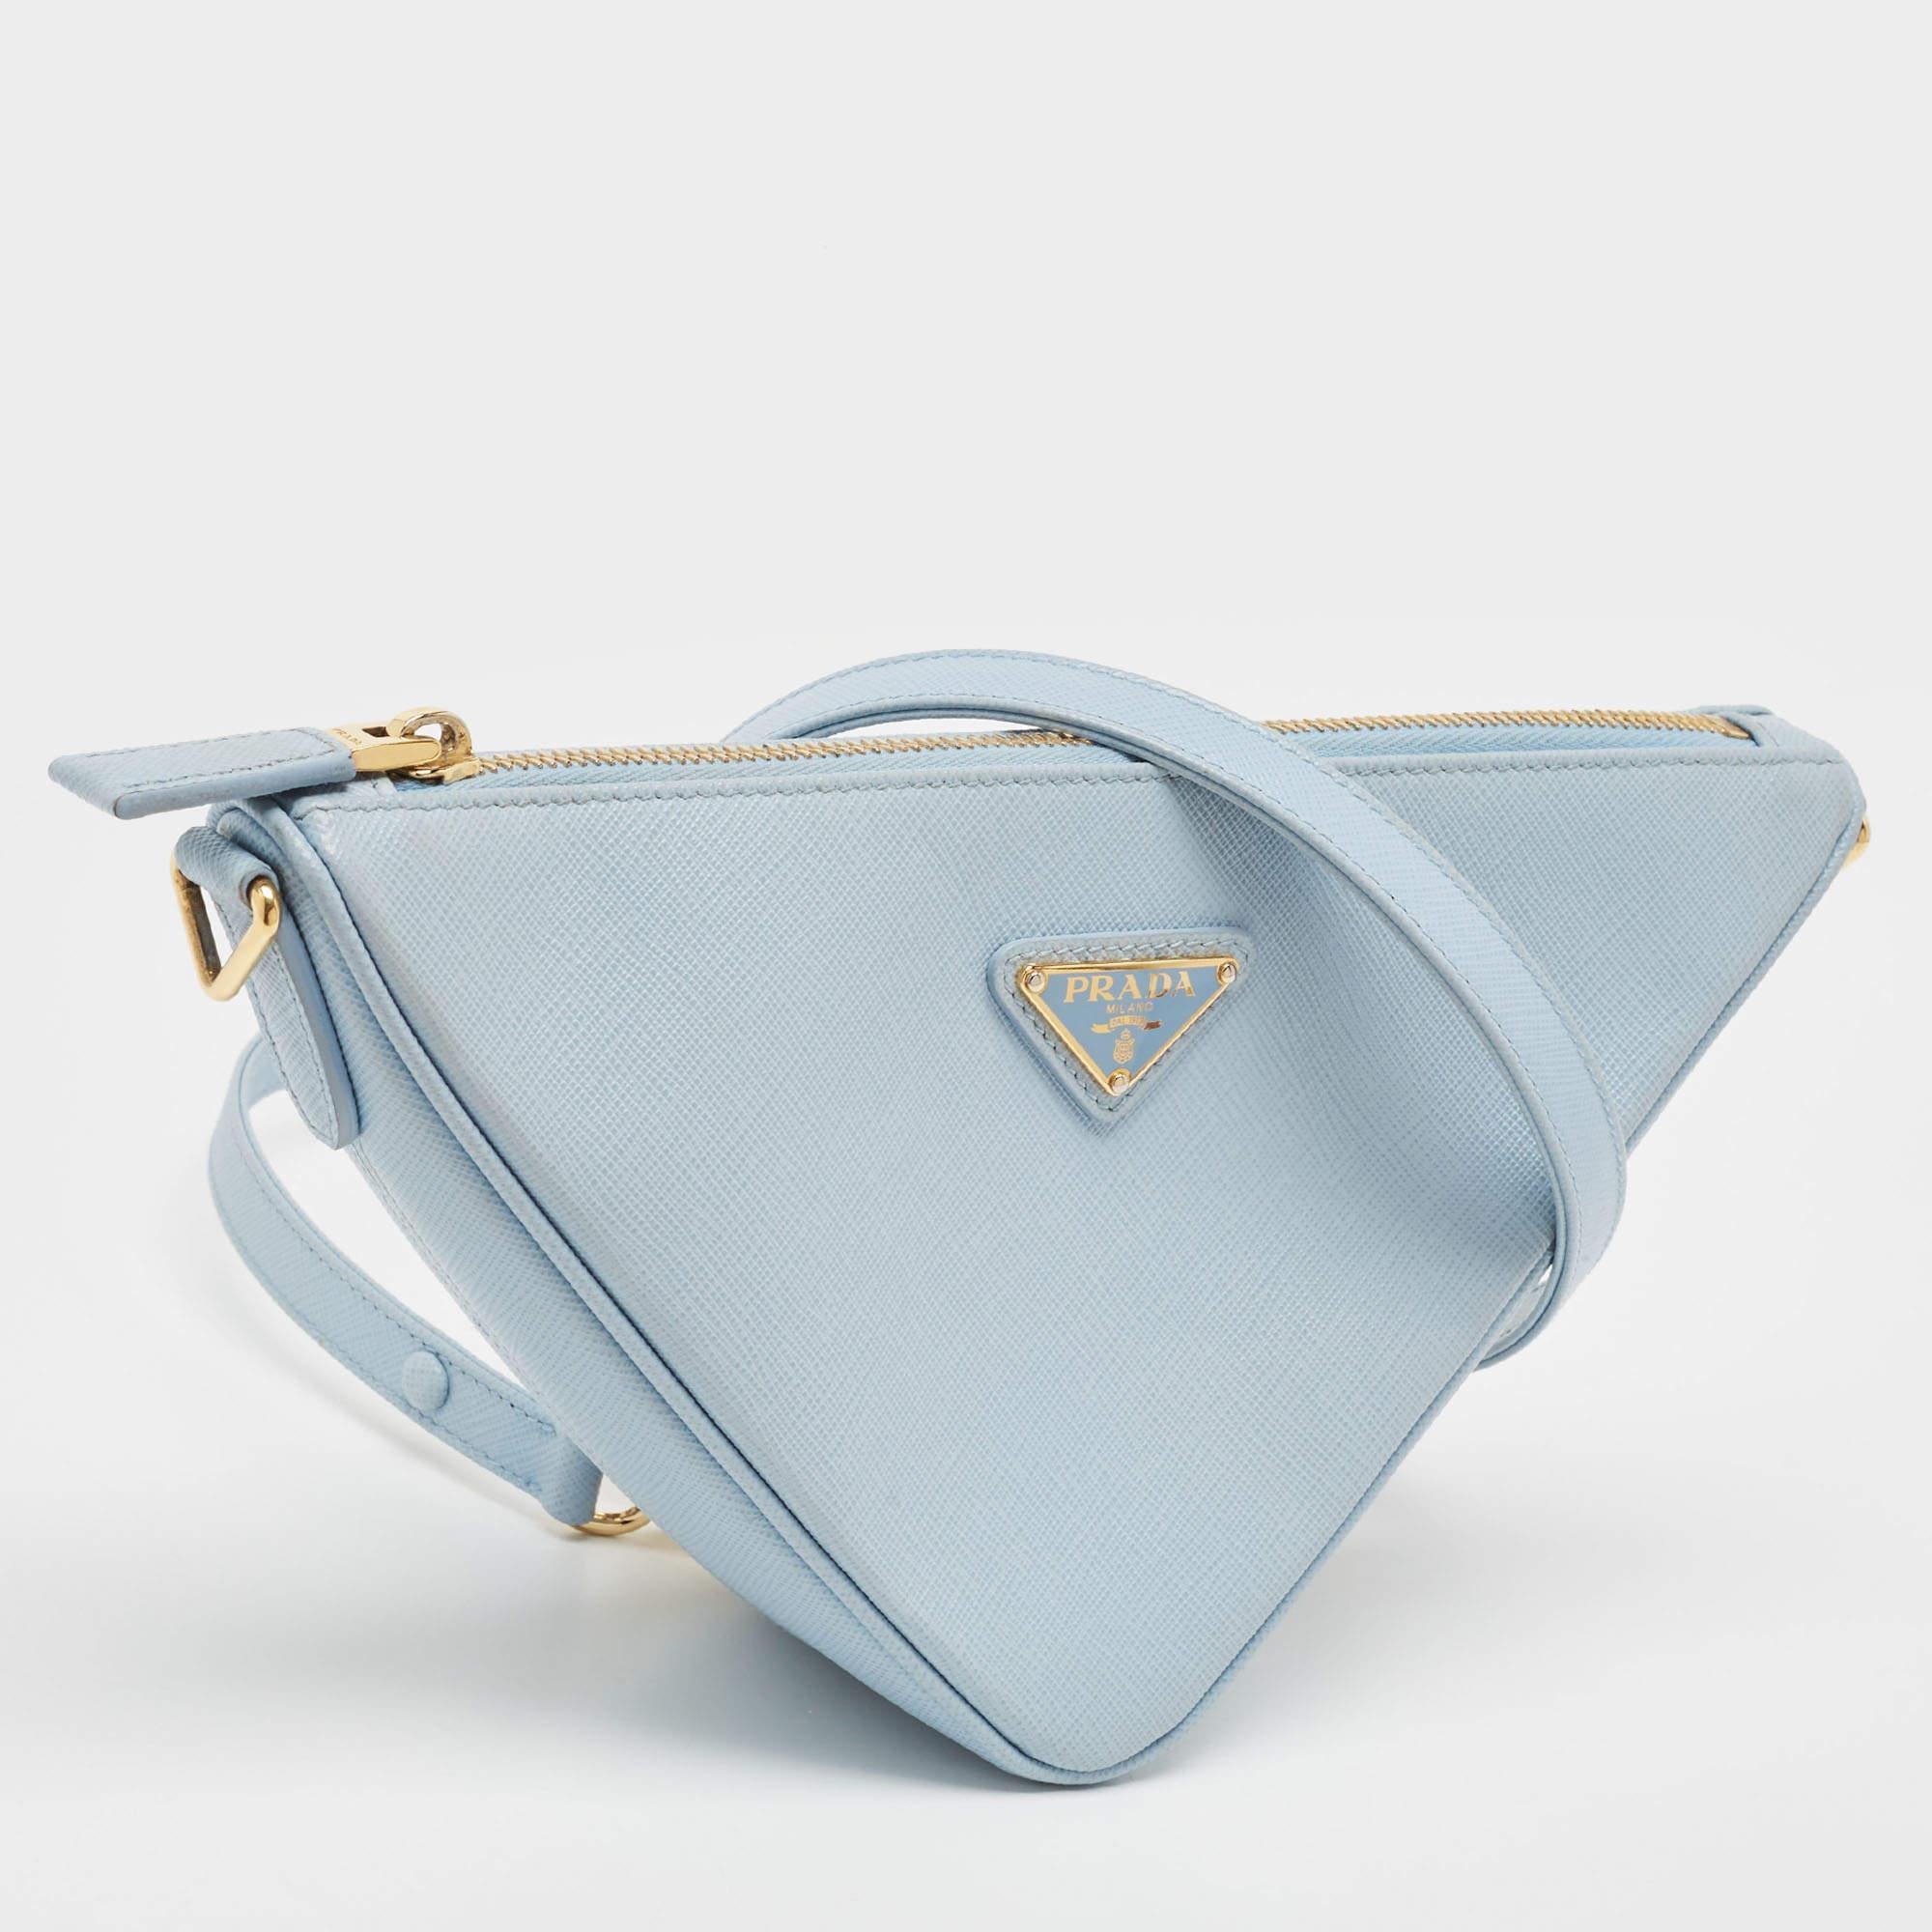 This stunning triangle bag by Prada has been crafted to instantly elevate your look. Made of leather in light blue, this bag has a luxe exterior with the brand accent on the front. It has a detachable strap.

